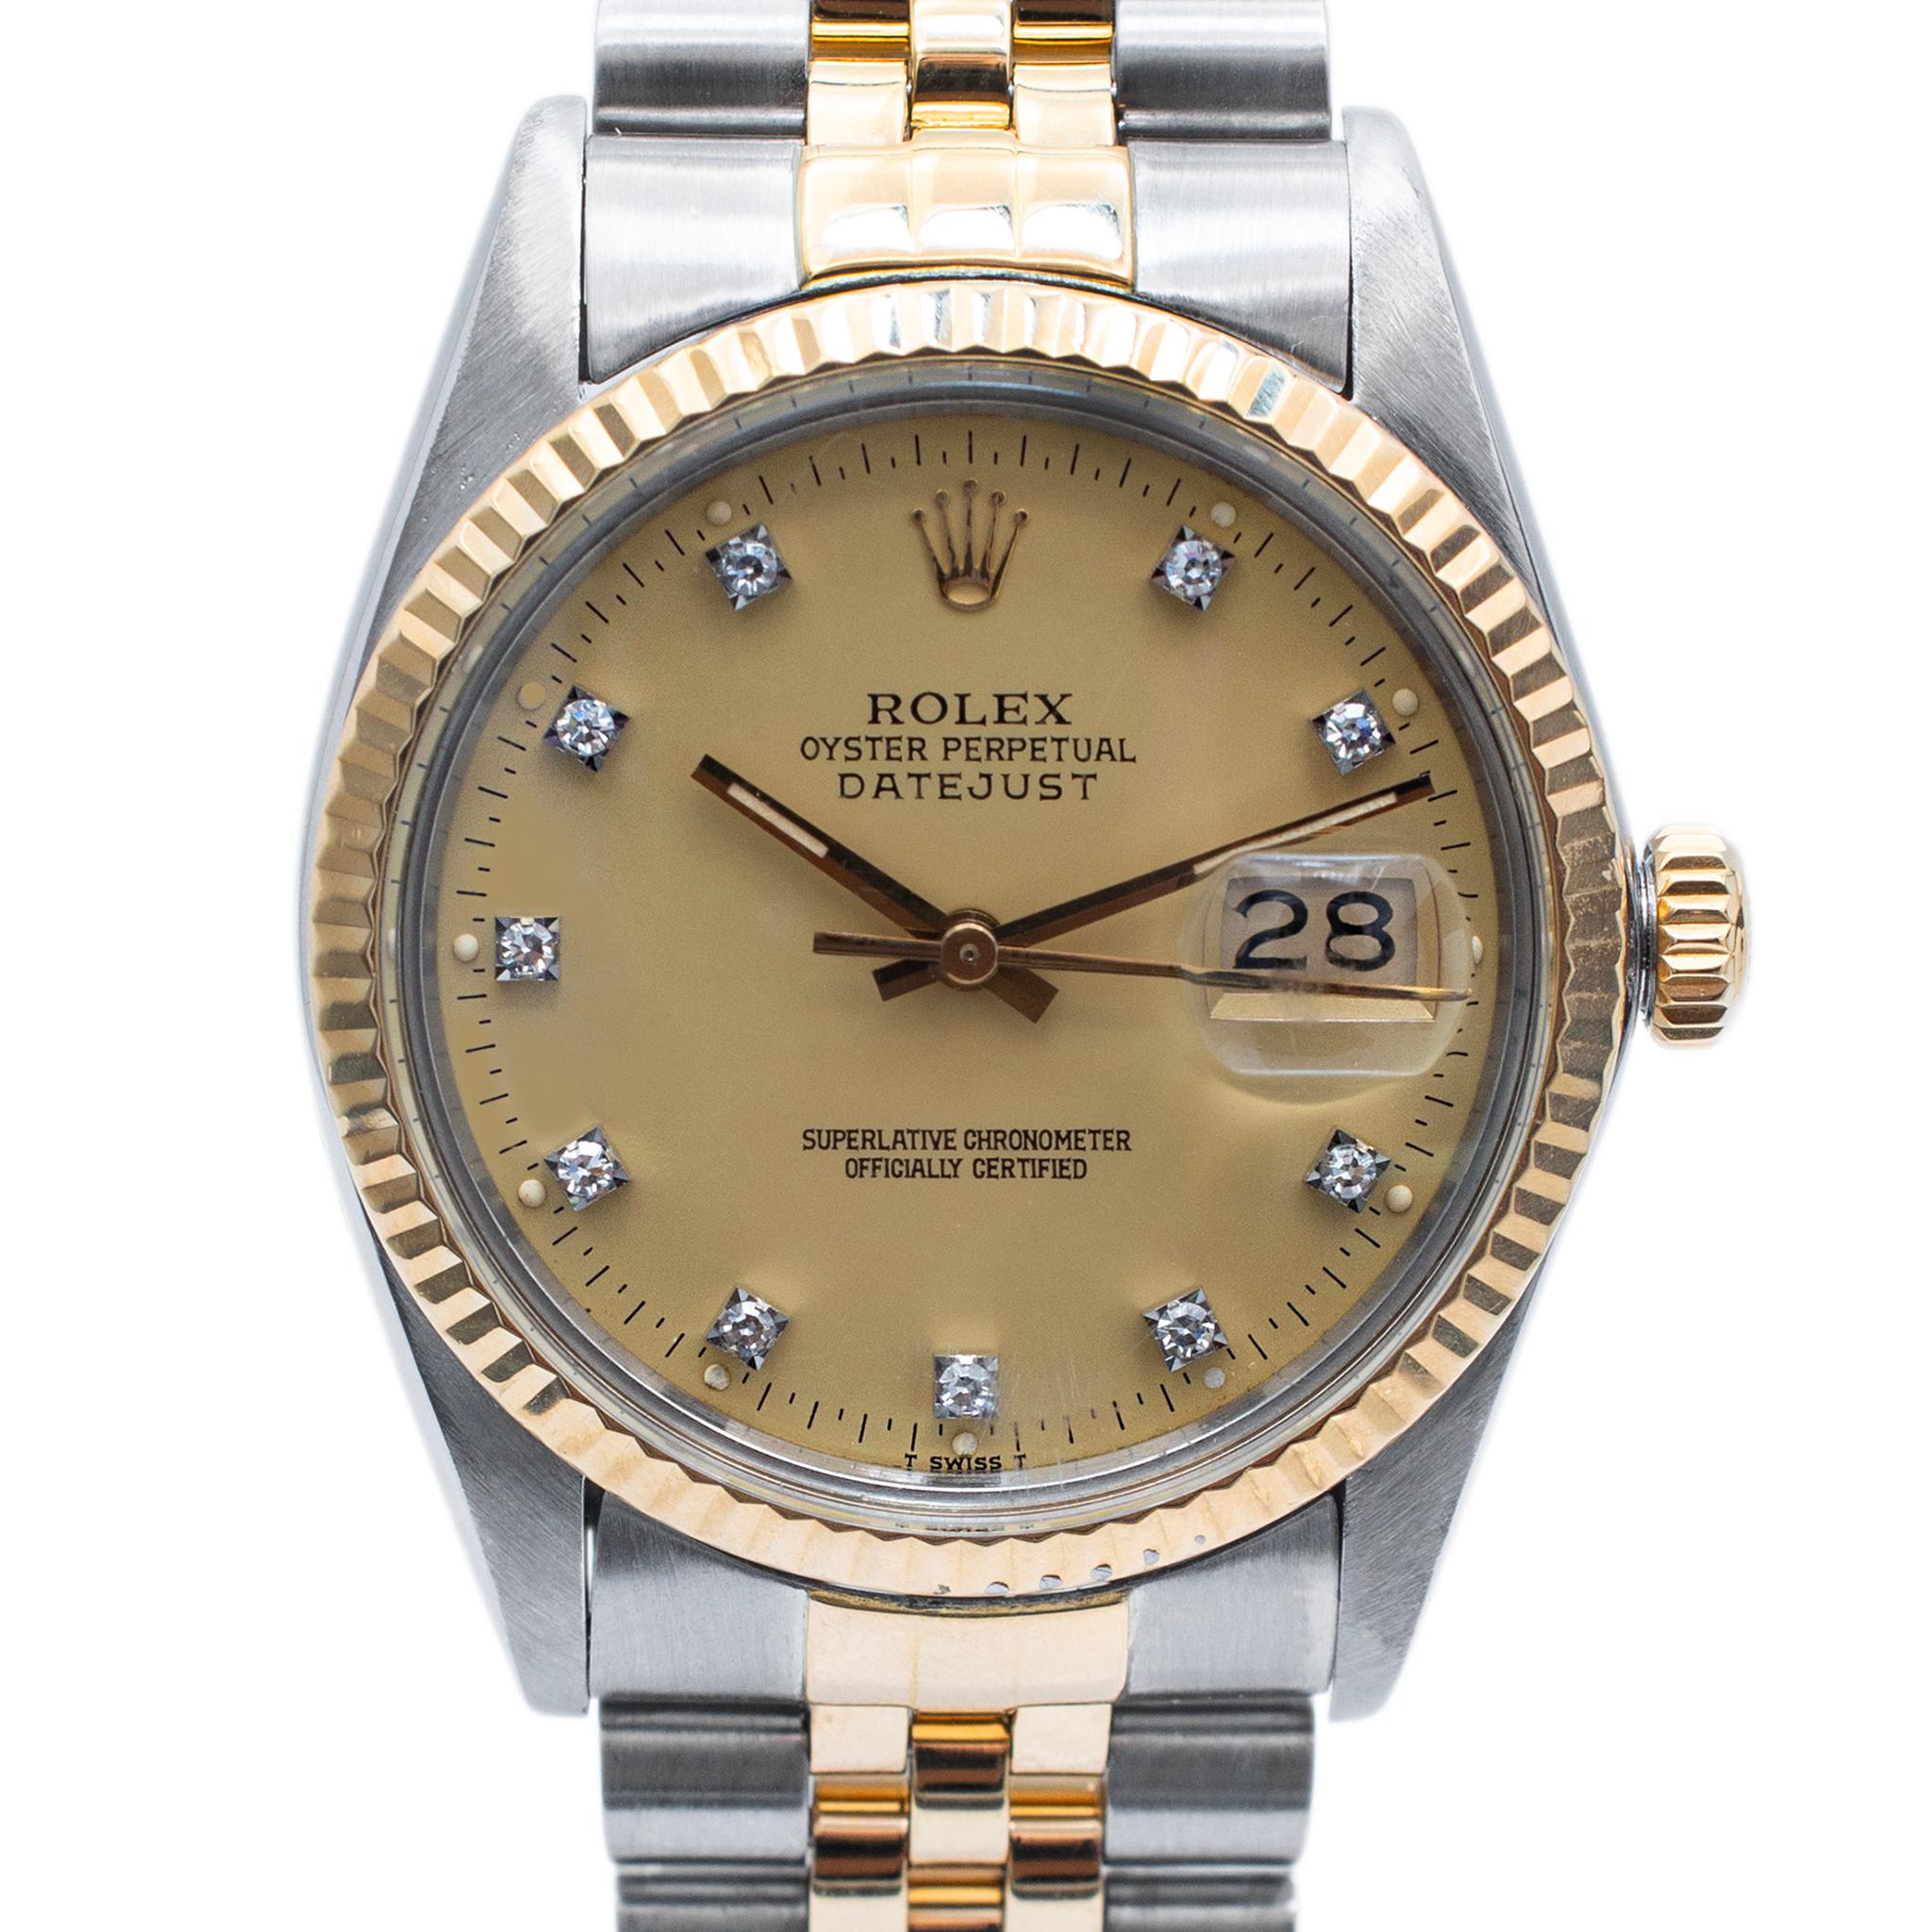 Brand: Rolex

Gender: Unisex

Metal Type: Stainless steel and 18K Yellow Gold

Diameter: 36.00 mm

Weight: 95.31 grams

Stainless steel and 18K yellow gold, diamond ROLEX Swiss-made watch. The metals were tested and determined to be stainless steel